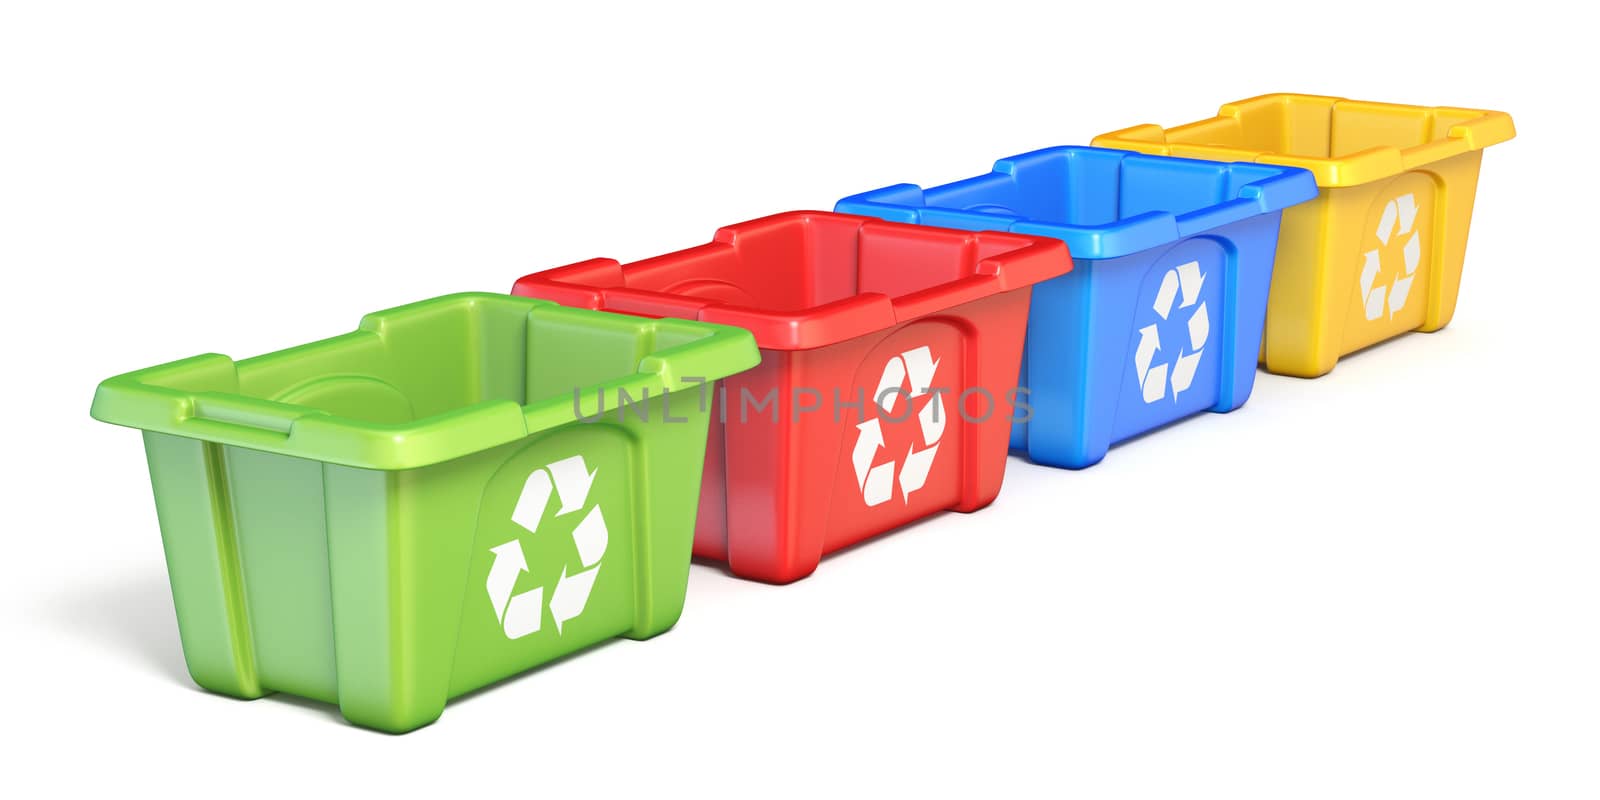 Four colorful recycle bins 3D by djmilic